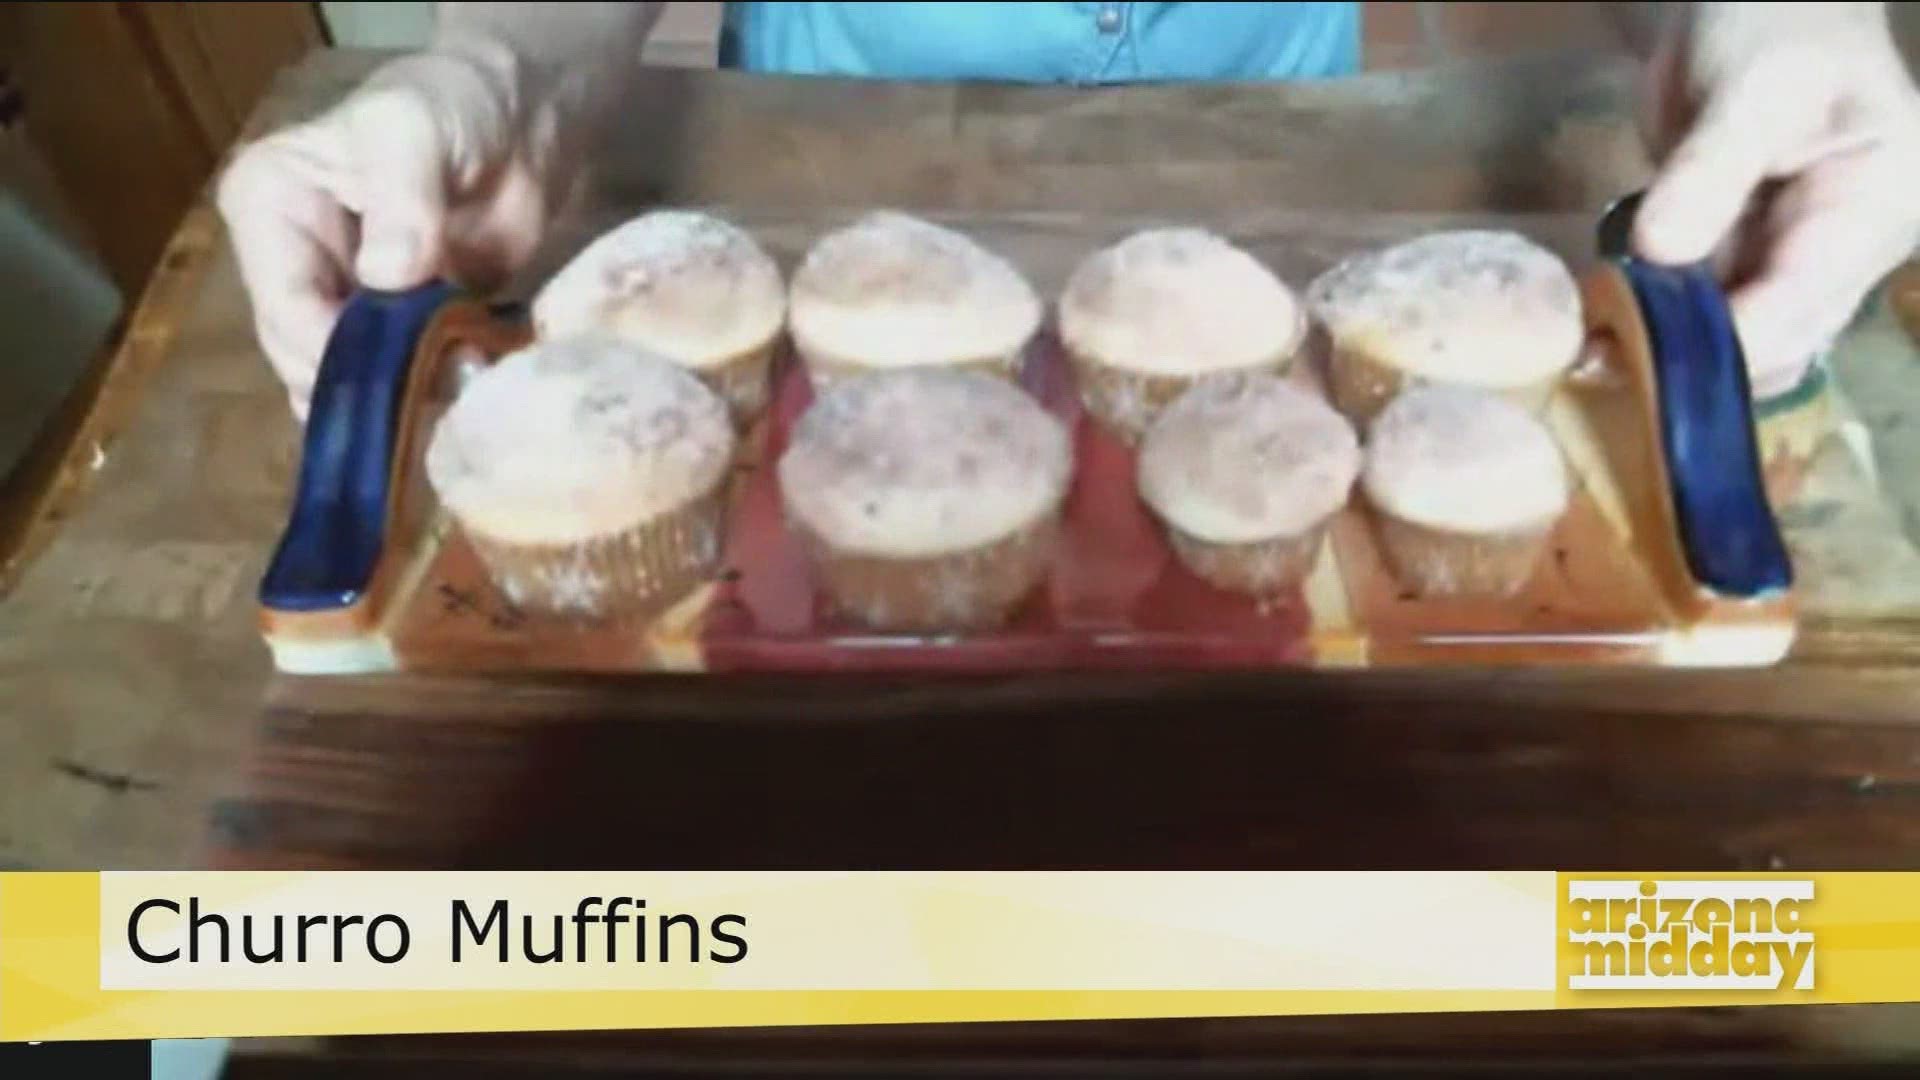 Jan Shows us how to create Churro inspired Muffins